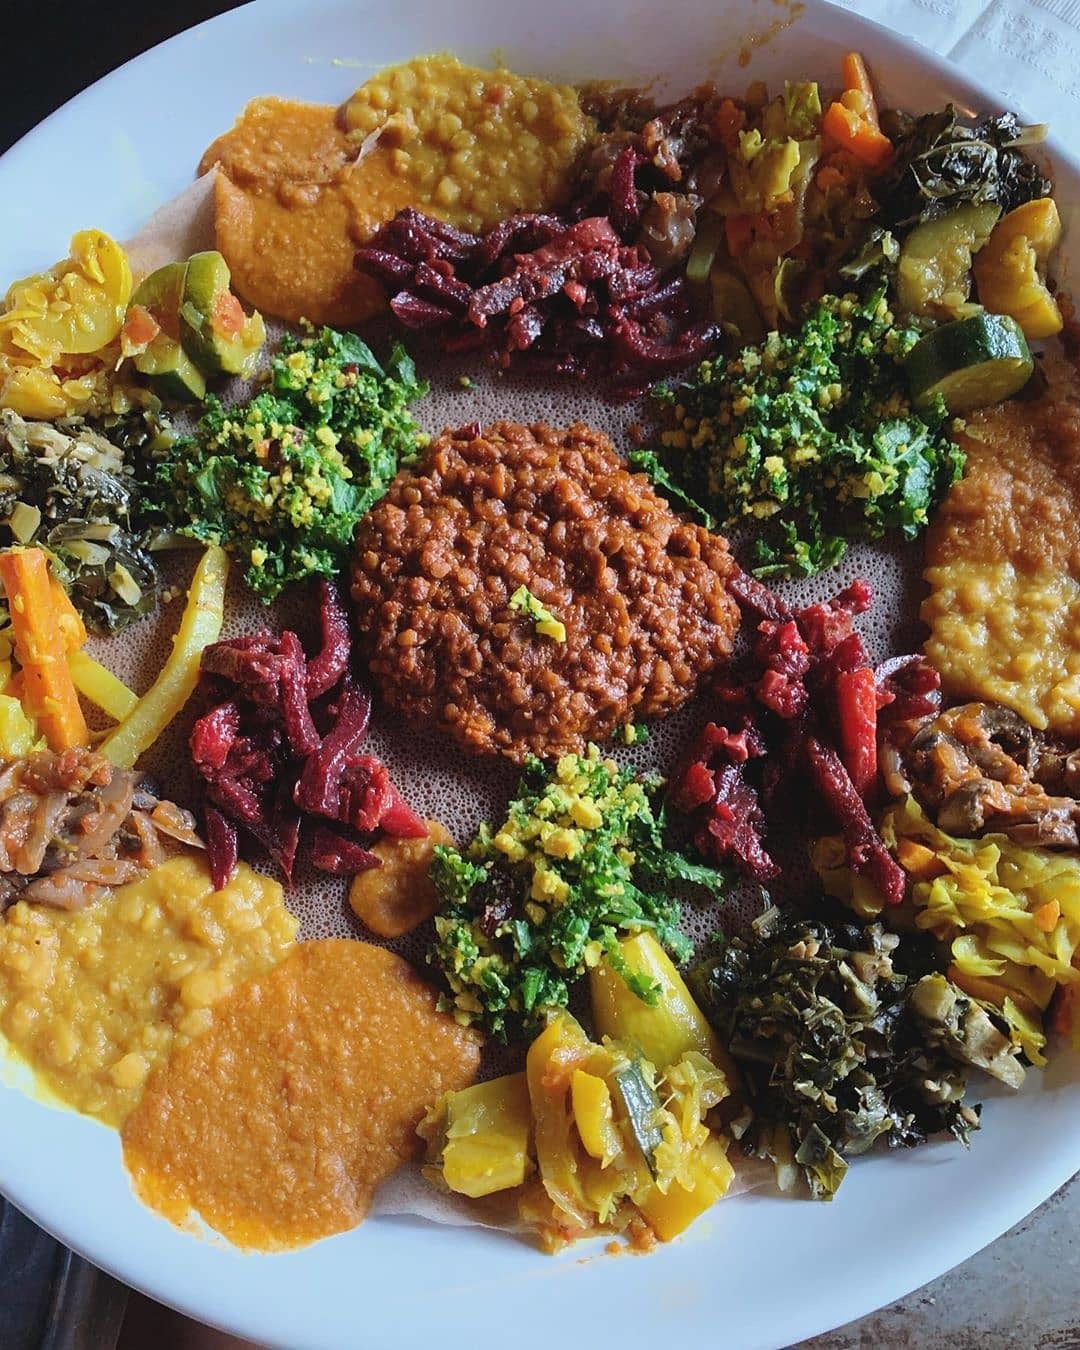 Your Ultimate Vegan Guide to Bushwick: 12 Restaurants With Delicious Plant-Based Meals